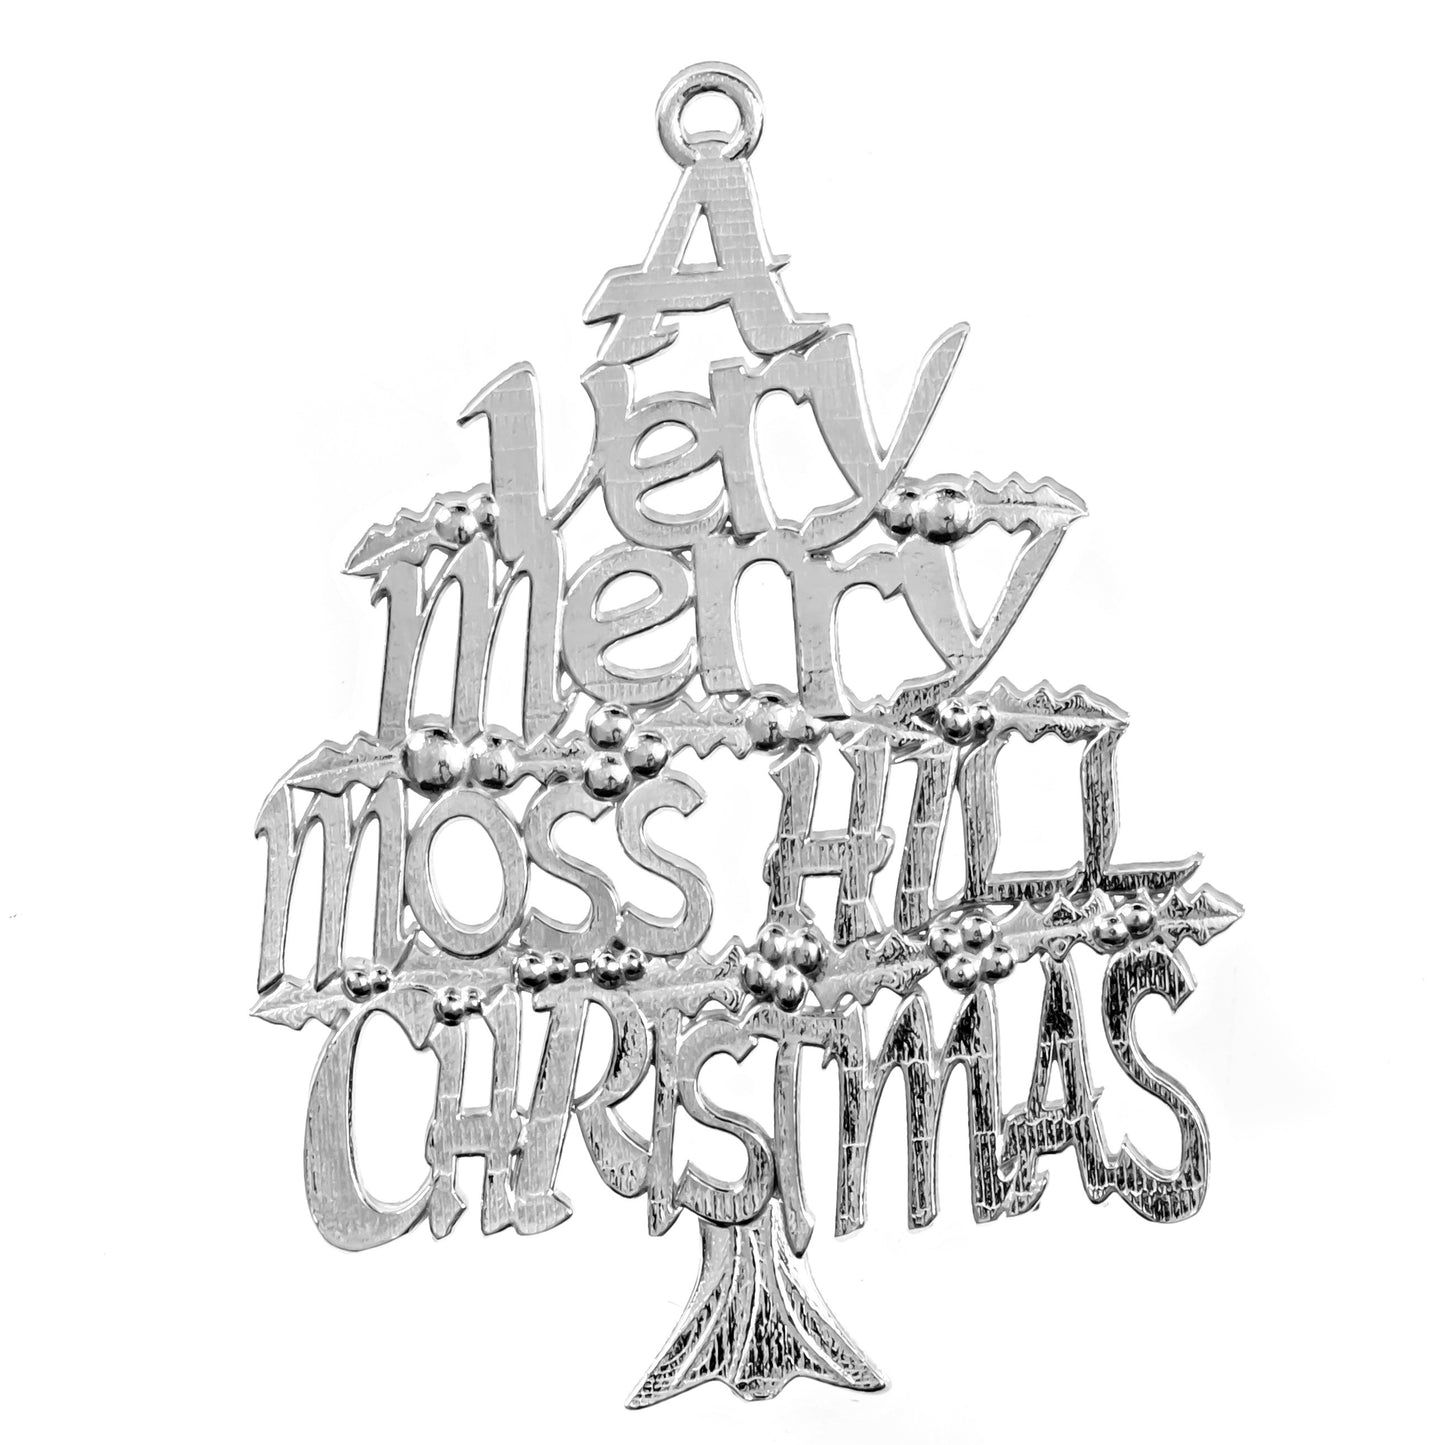 handcrafted pewter HomeState ornament Moss Hill